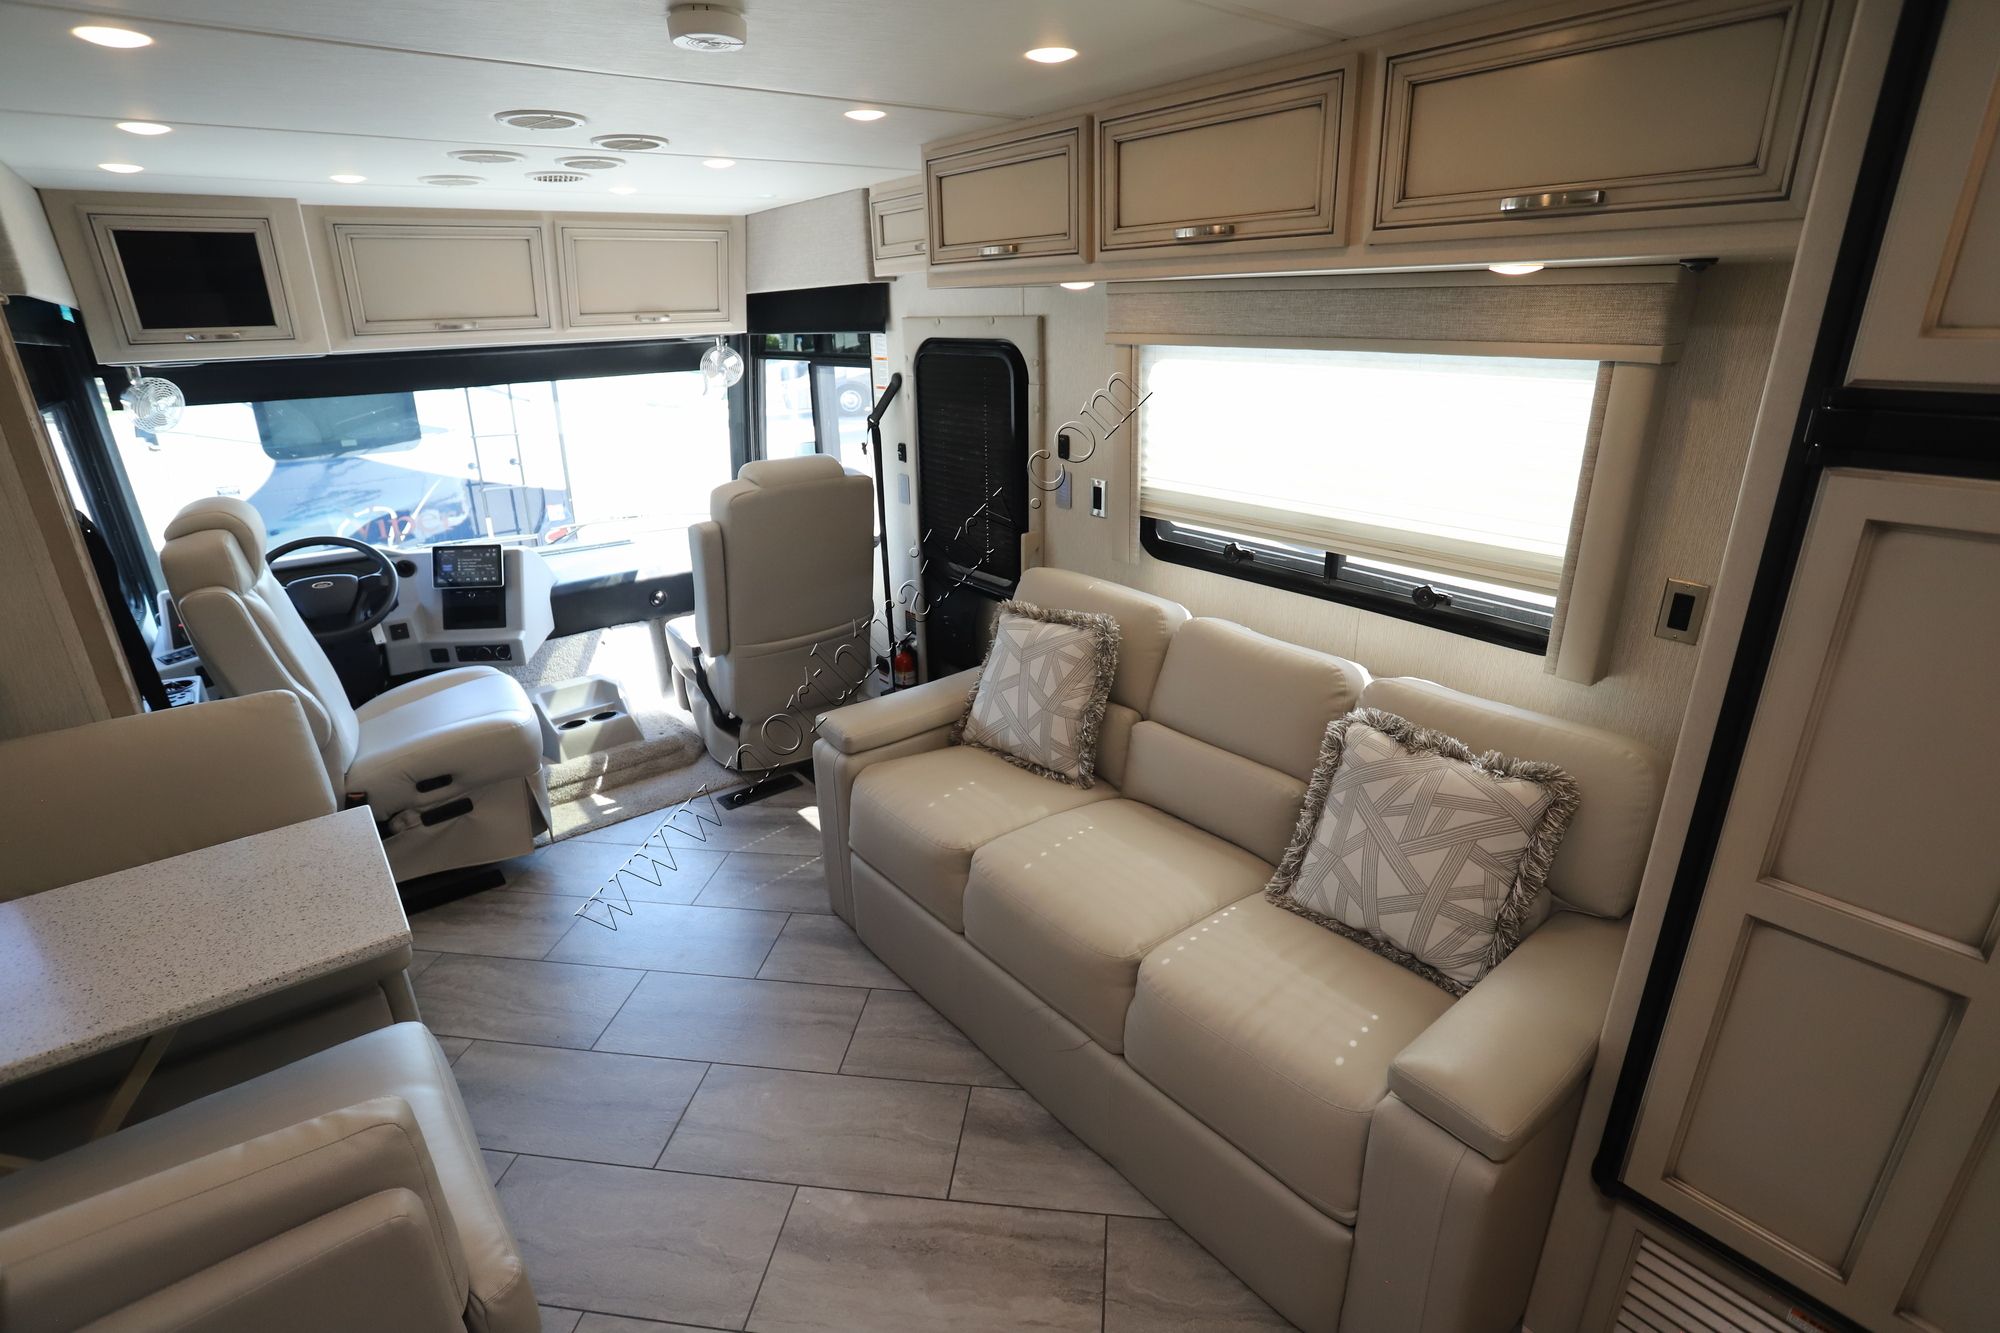 Used 2023 Newmar Bay Star Sport 2813 Class A  For Sale